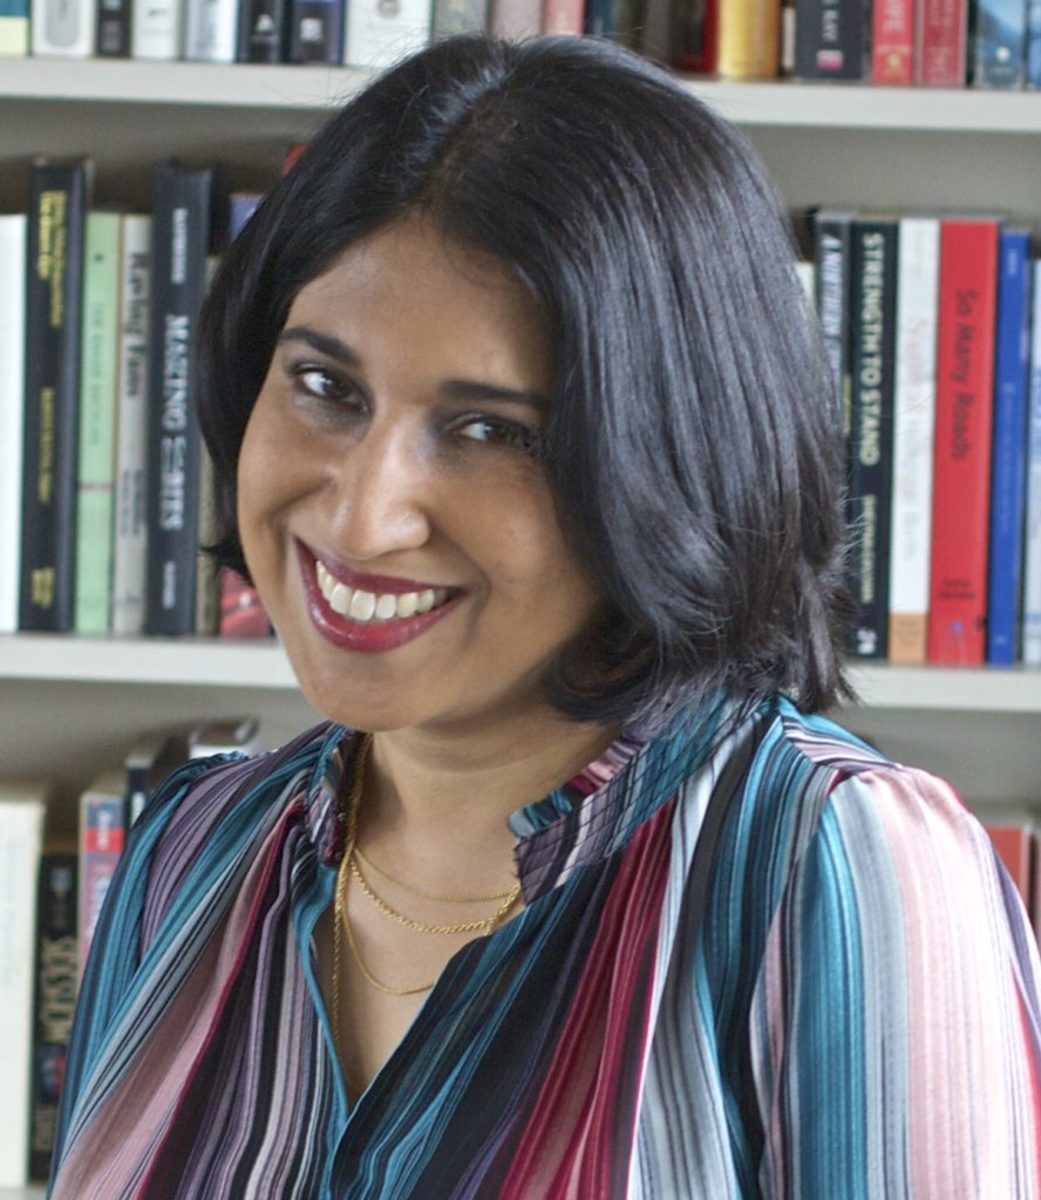  A former acquiring editor of children’s books at Little, Brown and Simon & Schuster, Sangeeta Mehta (@sangeeta_editor) runs her own editorial services company. She also founded and co-chairs the Editorial Freelancers Association’s Diversity Initiative and serves on the board of The Word, a nonprofit that promotes diversity in literature.